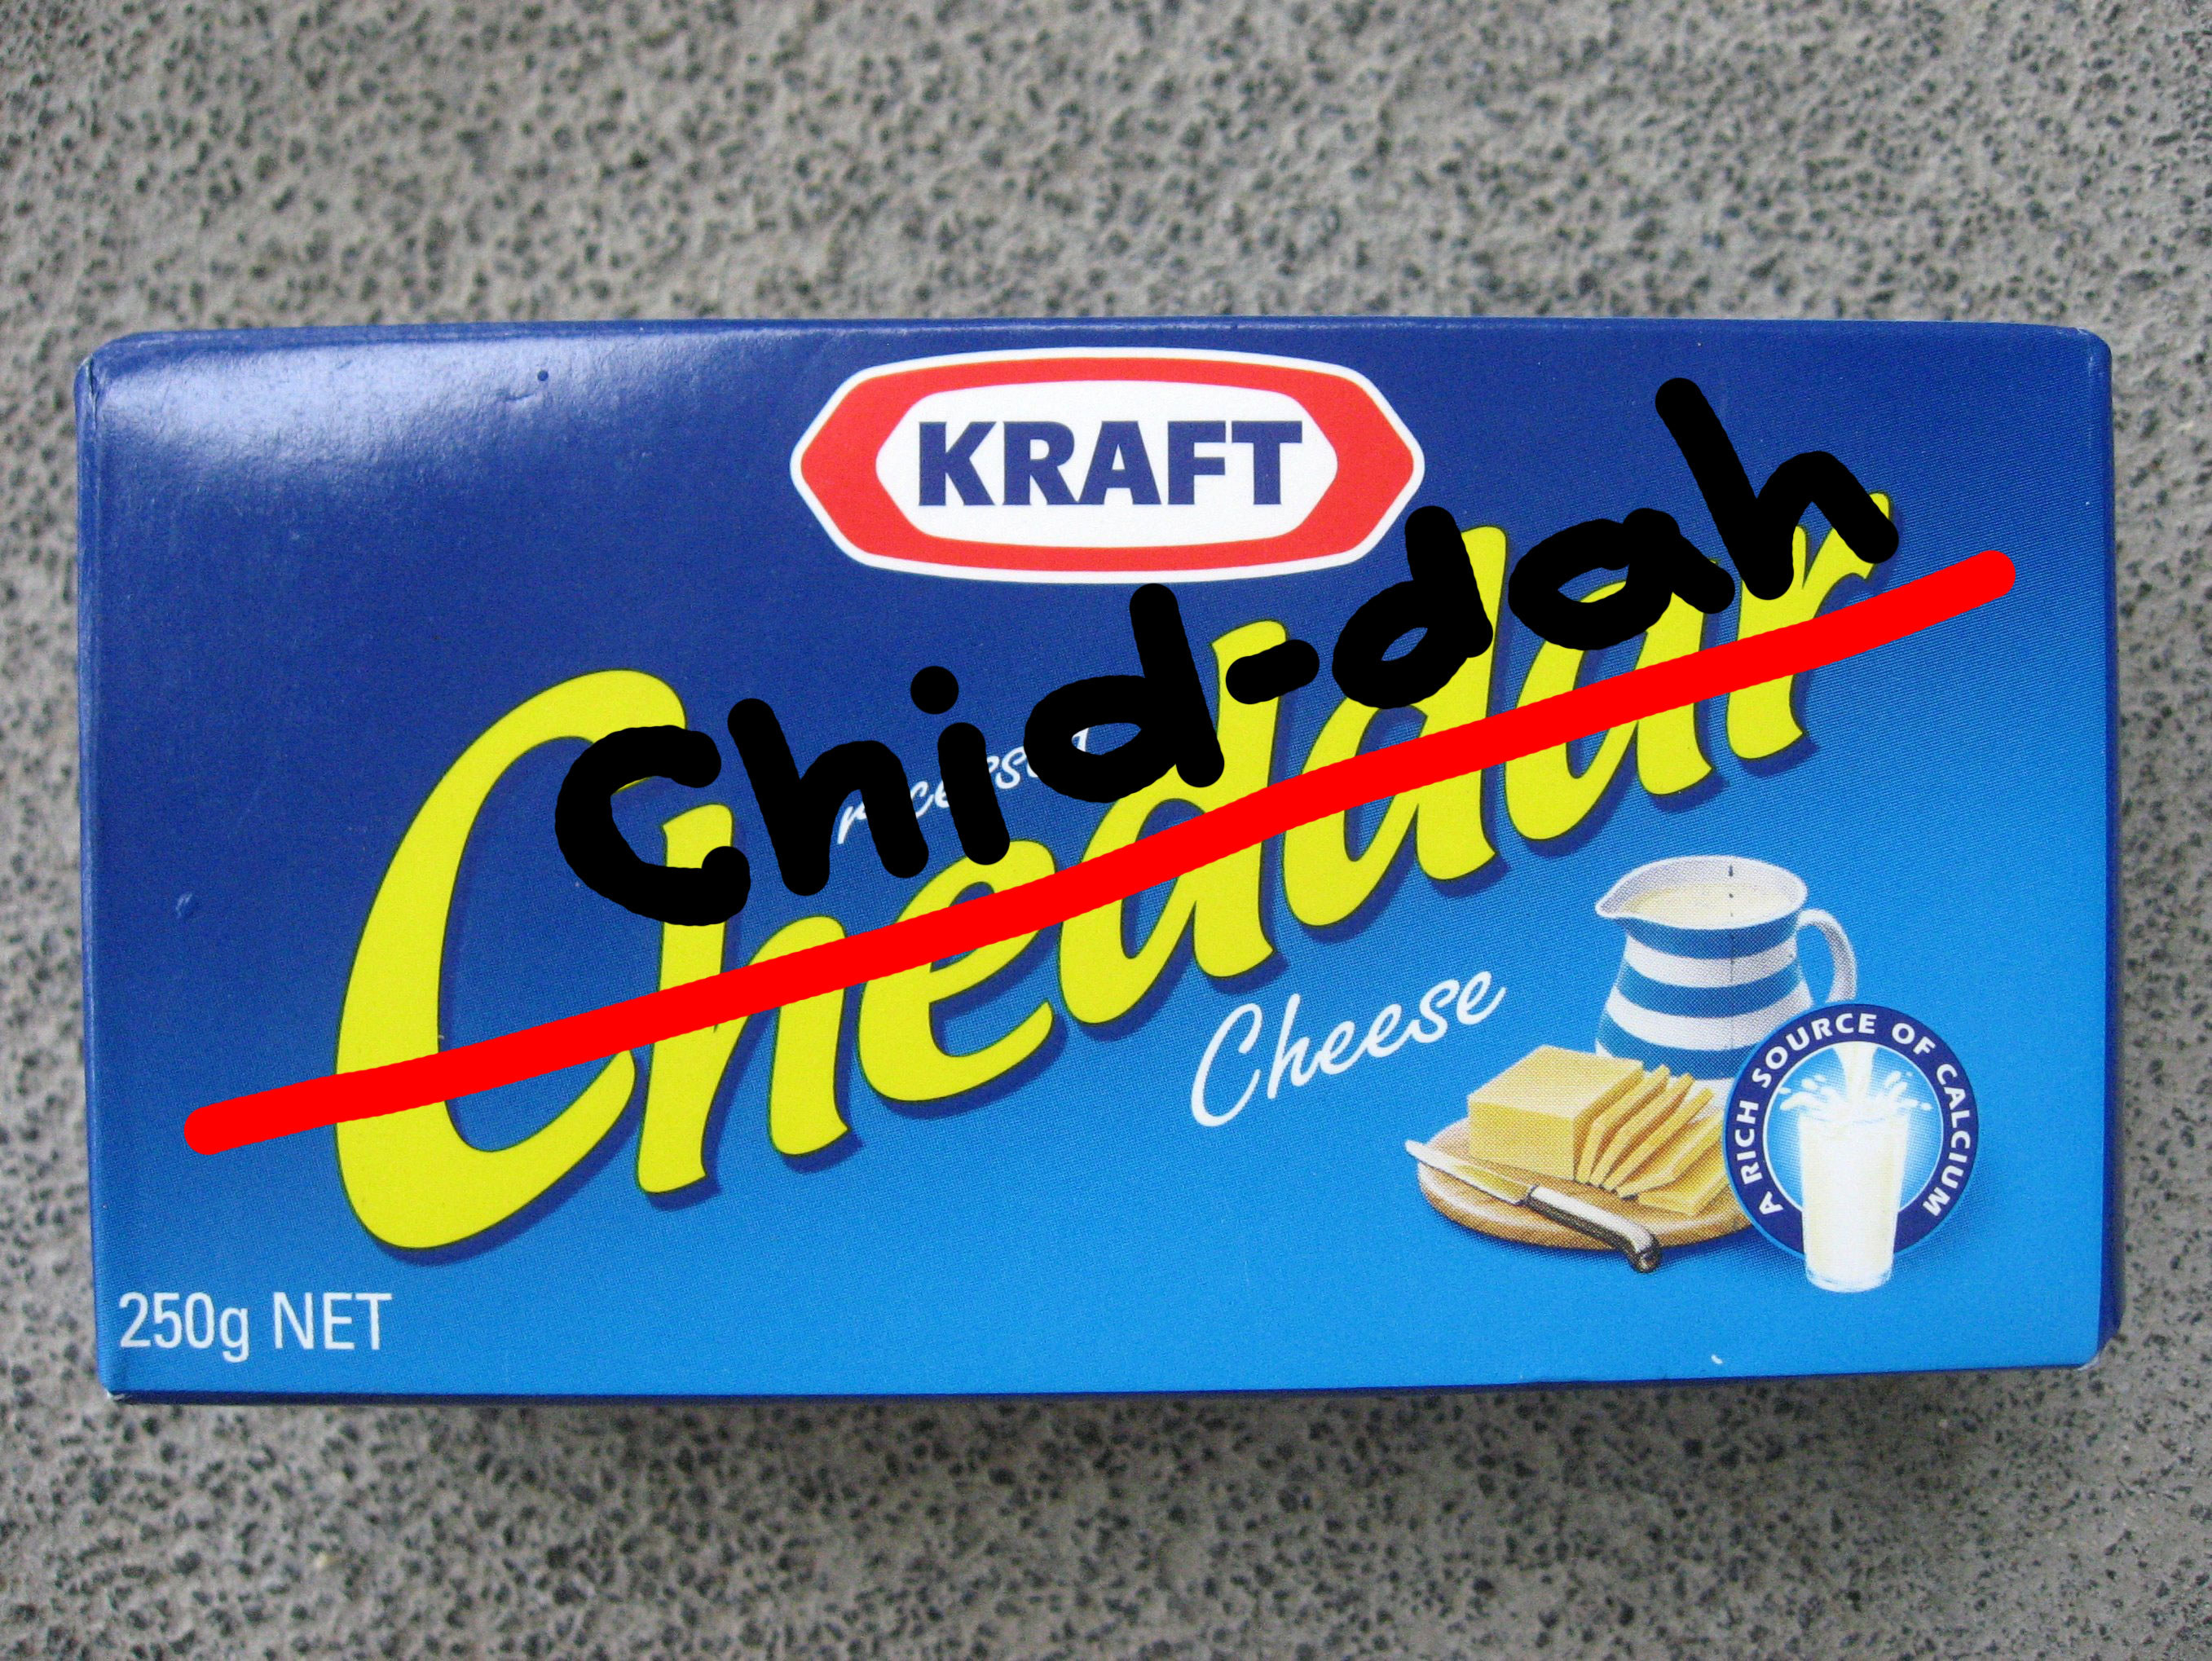 A package of Kraft Cheddar Cheese with &quot;Cheddar&quot; crossed out and replaced by &quot;Chid-dah&quot;